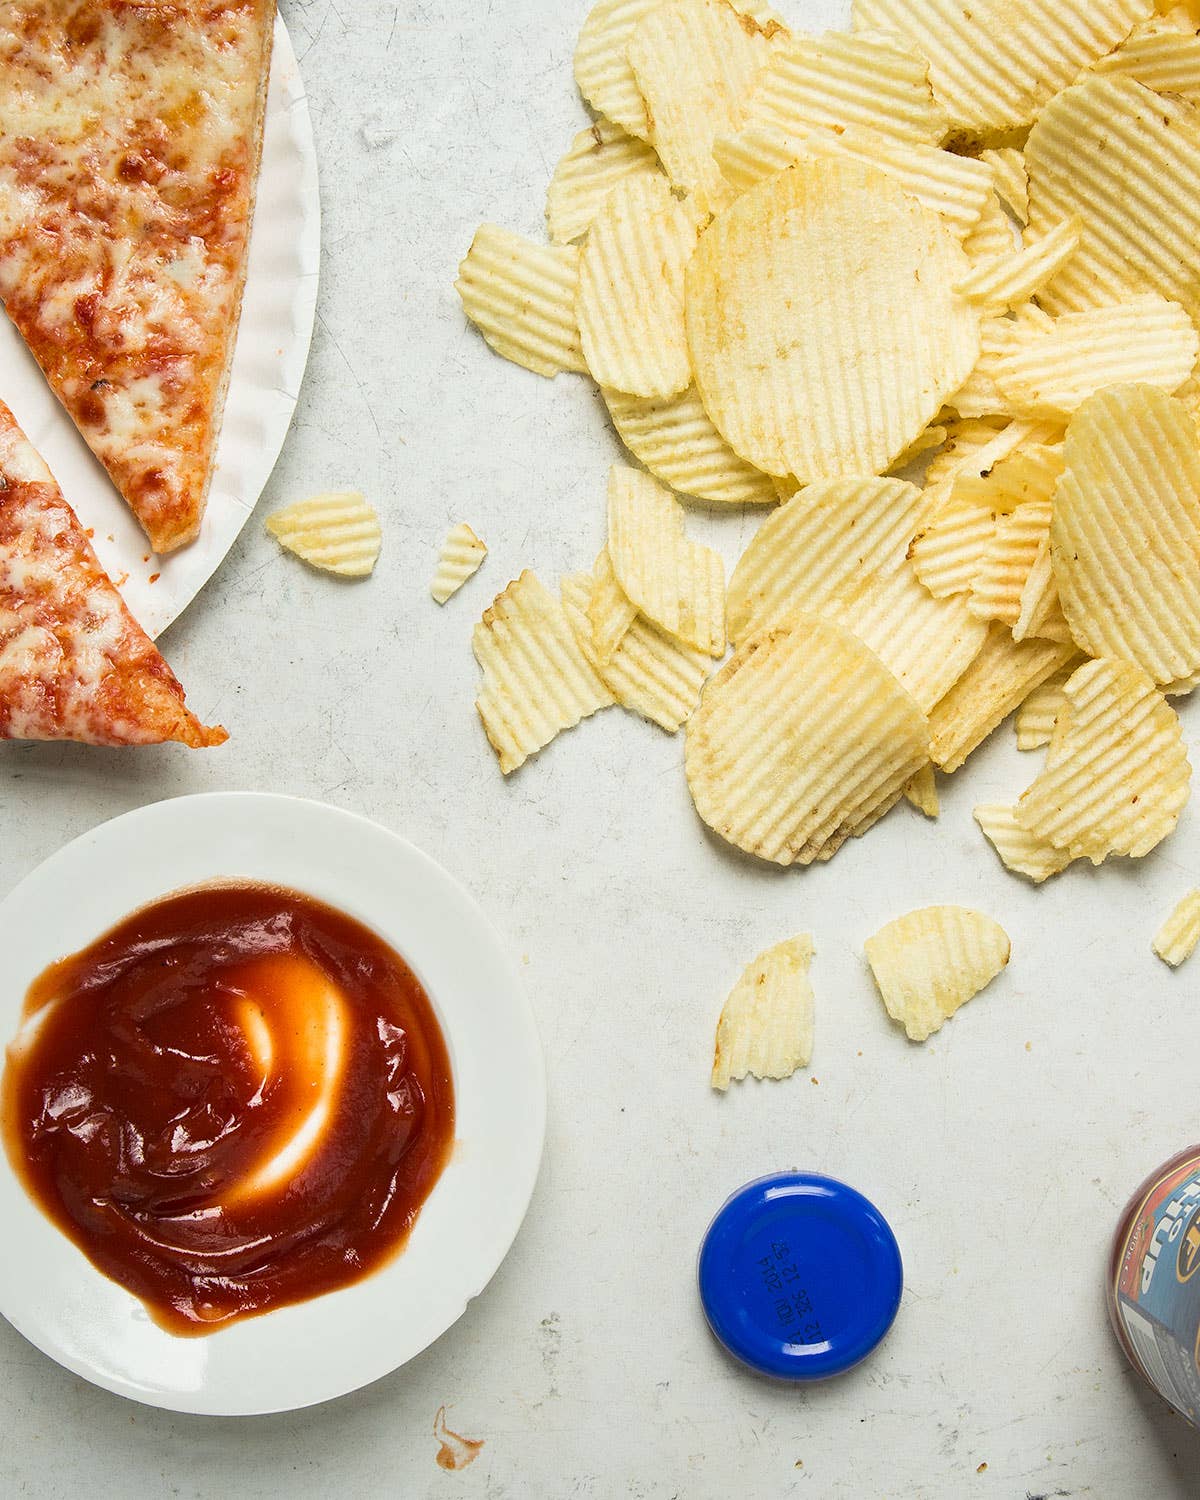 Obsessions: Irish Ketchup, with Plenty of Bite